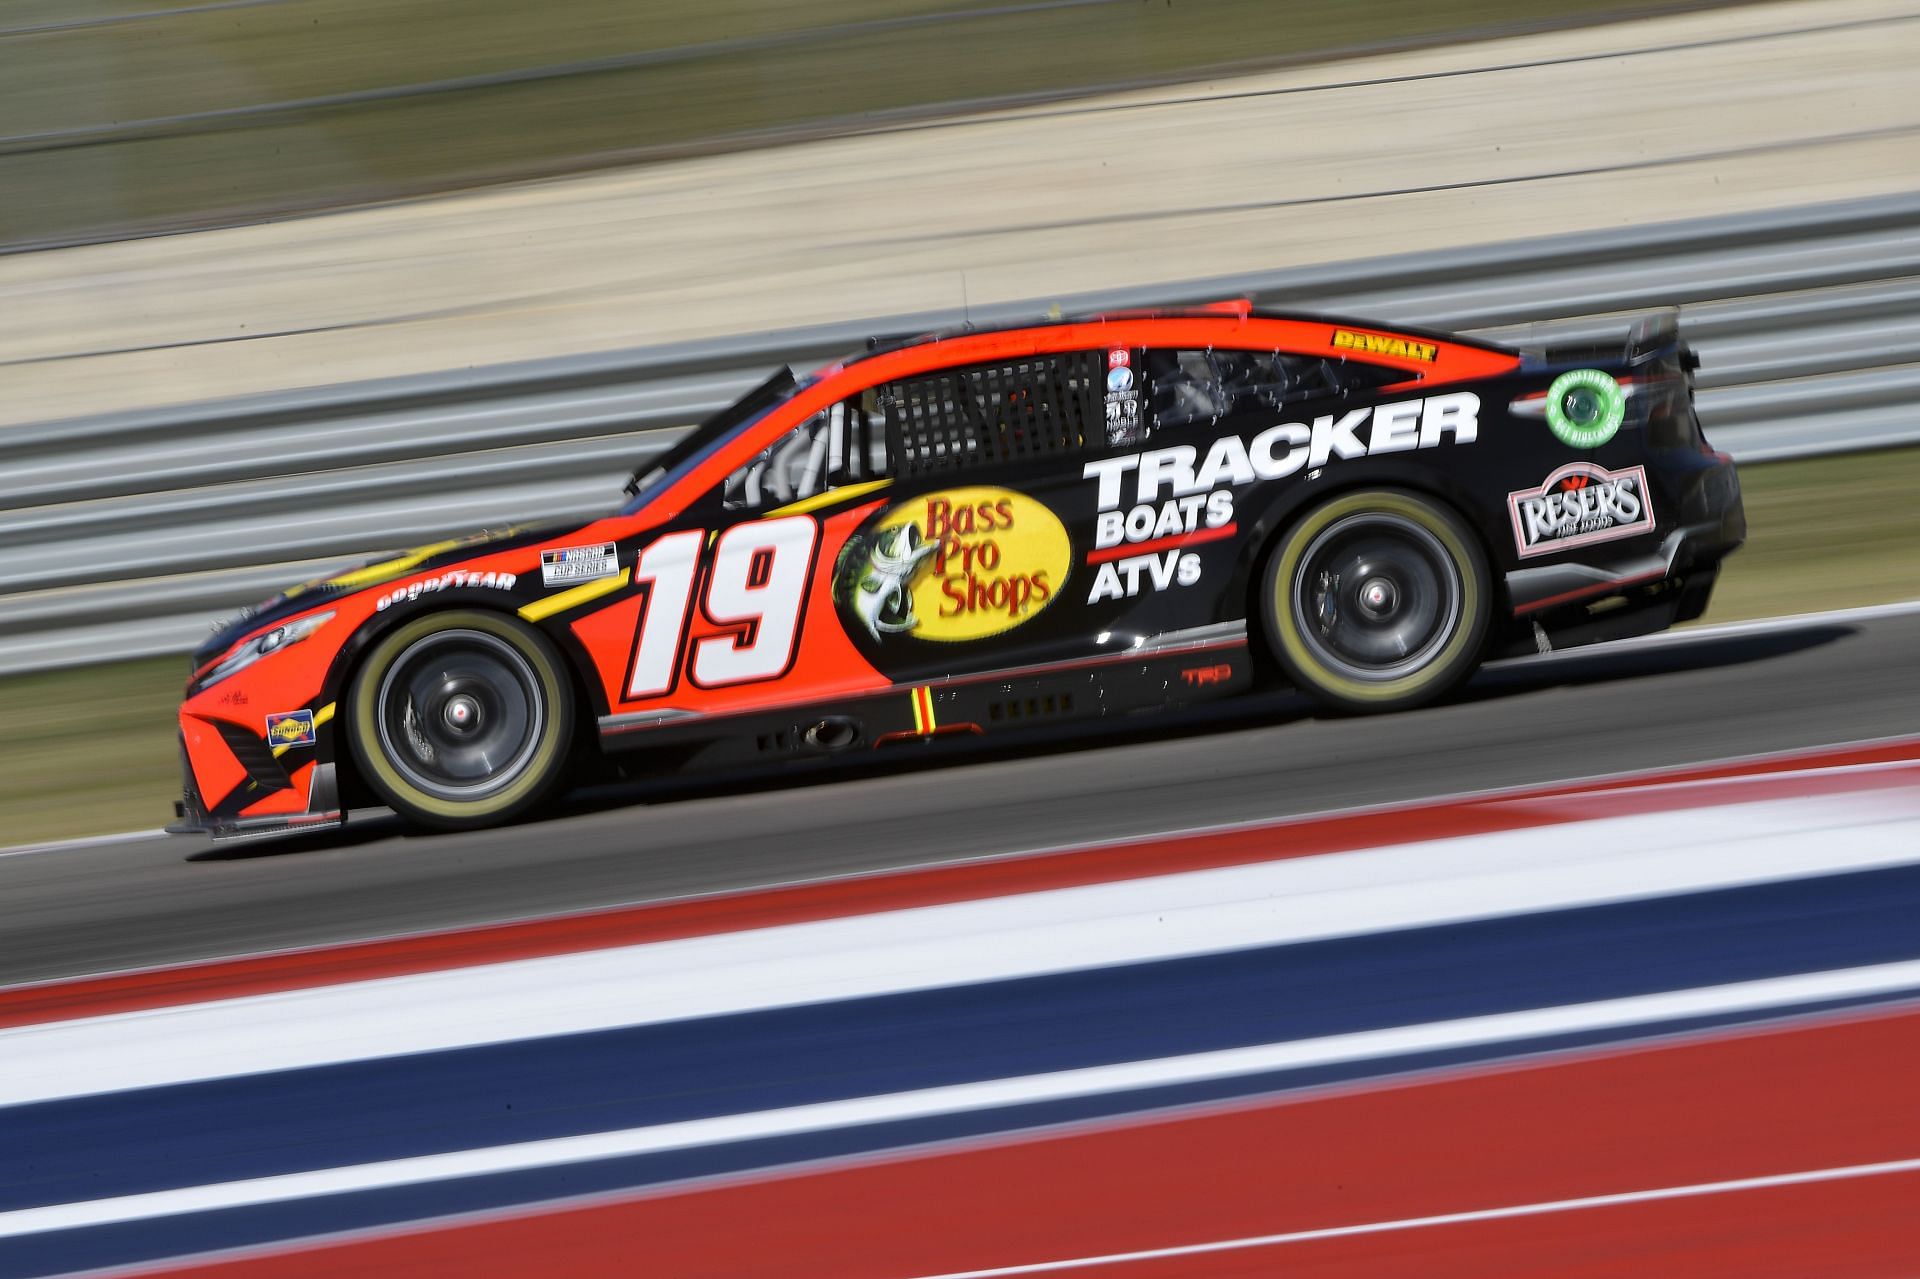 Martin Truex Jr. during the NASCAR Cup Series Echopark Automotive Grand Prix at the Circuit of the Americas in Austin, Texas. (Photo by Logan Riely/Getty Images)